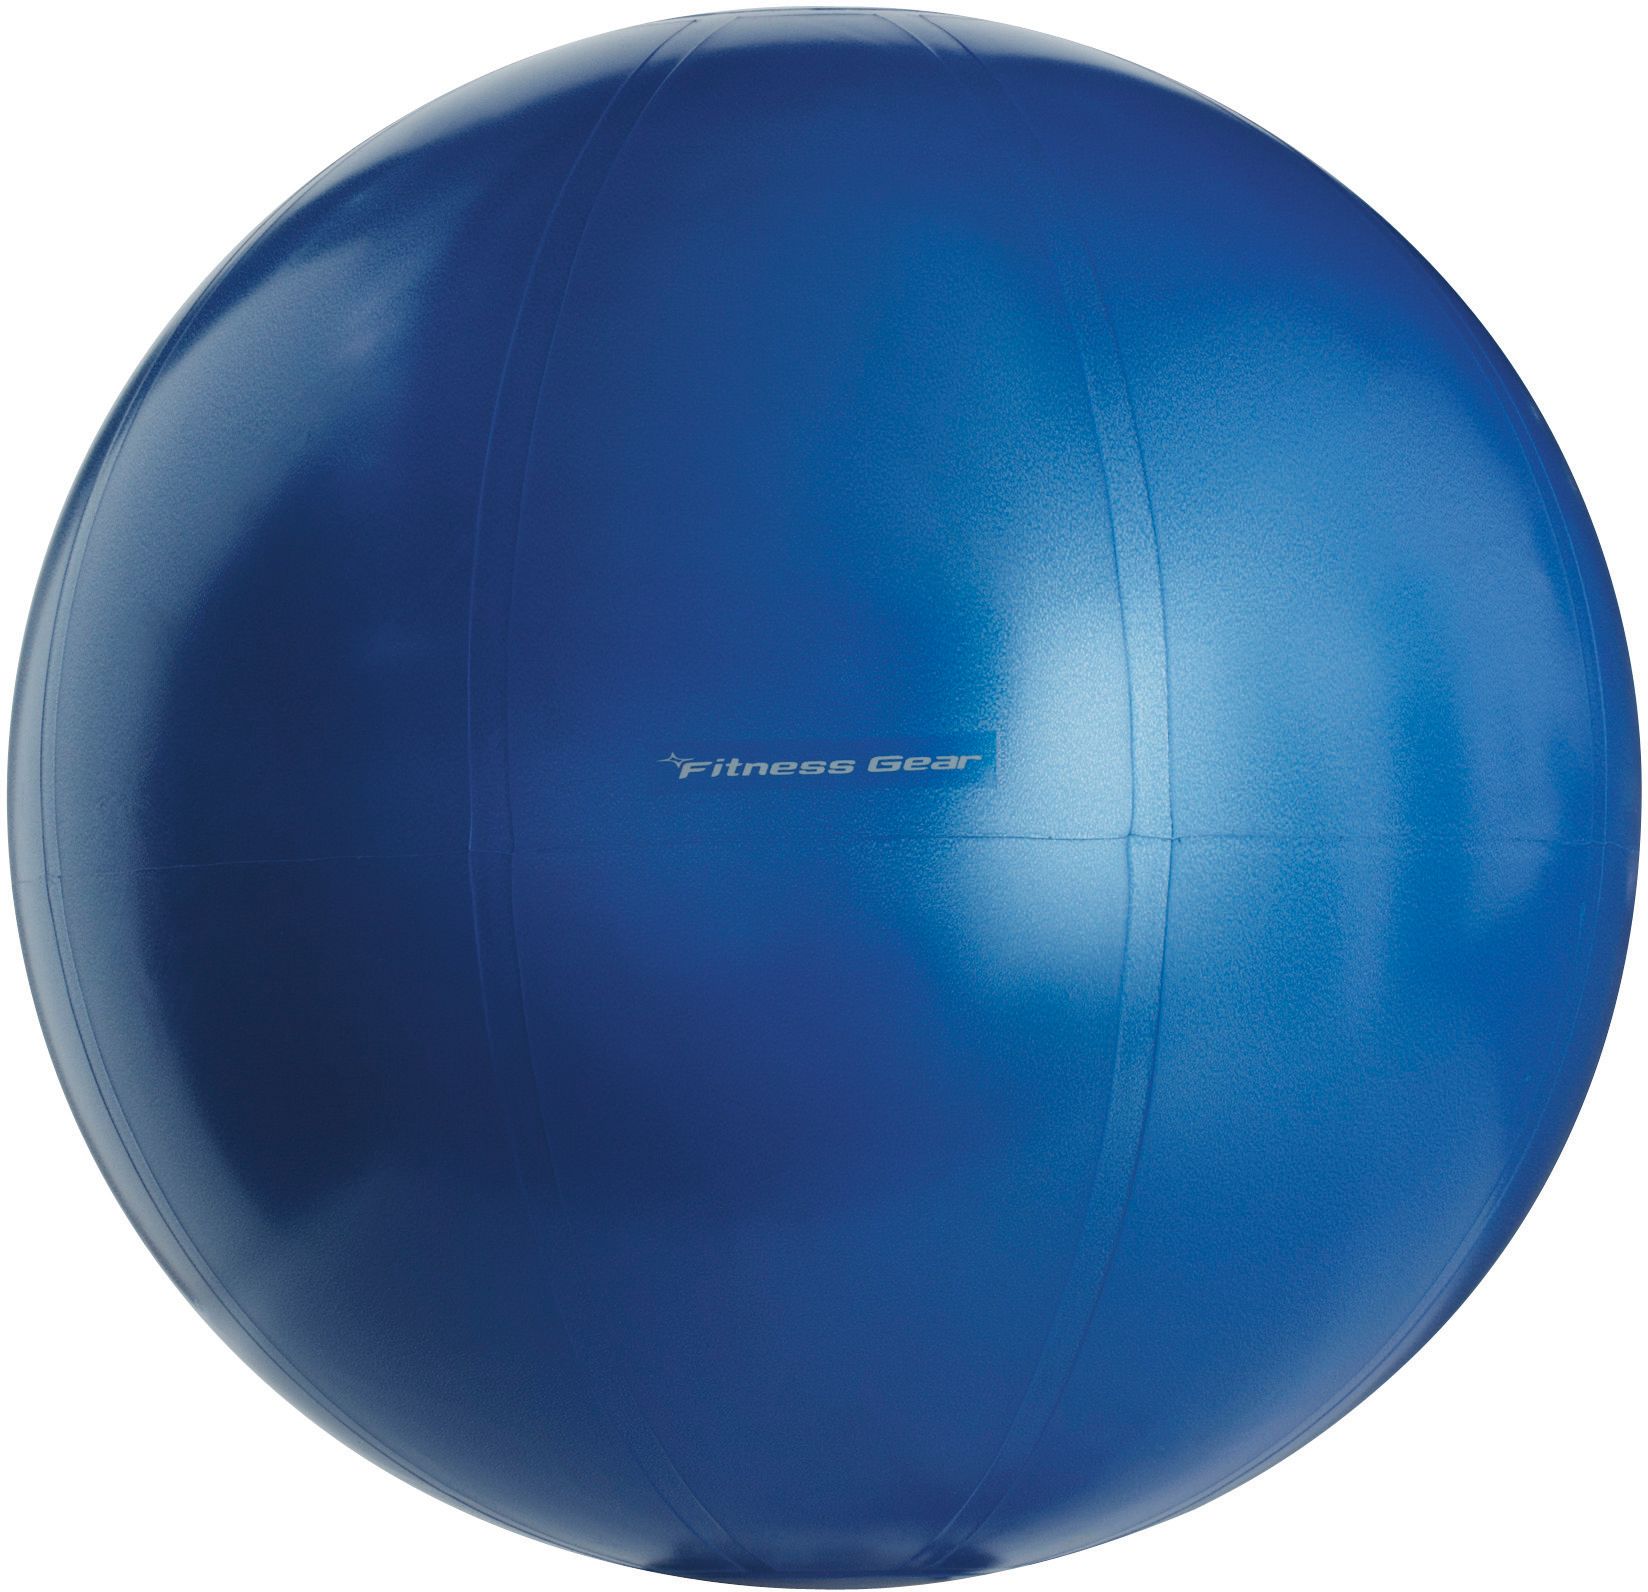 Fitness Gear 65 cm Premium Stability Ball | DICK'S Sporting Goods